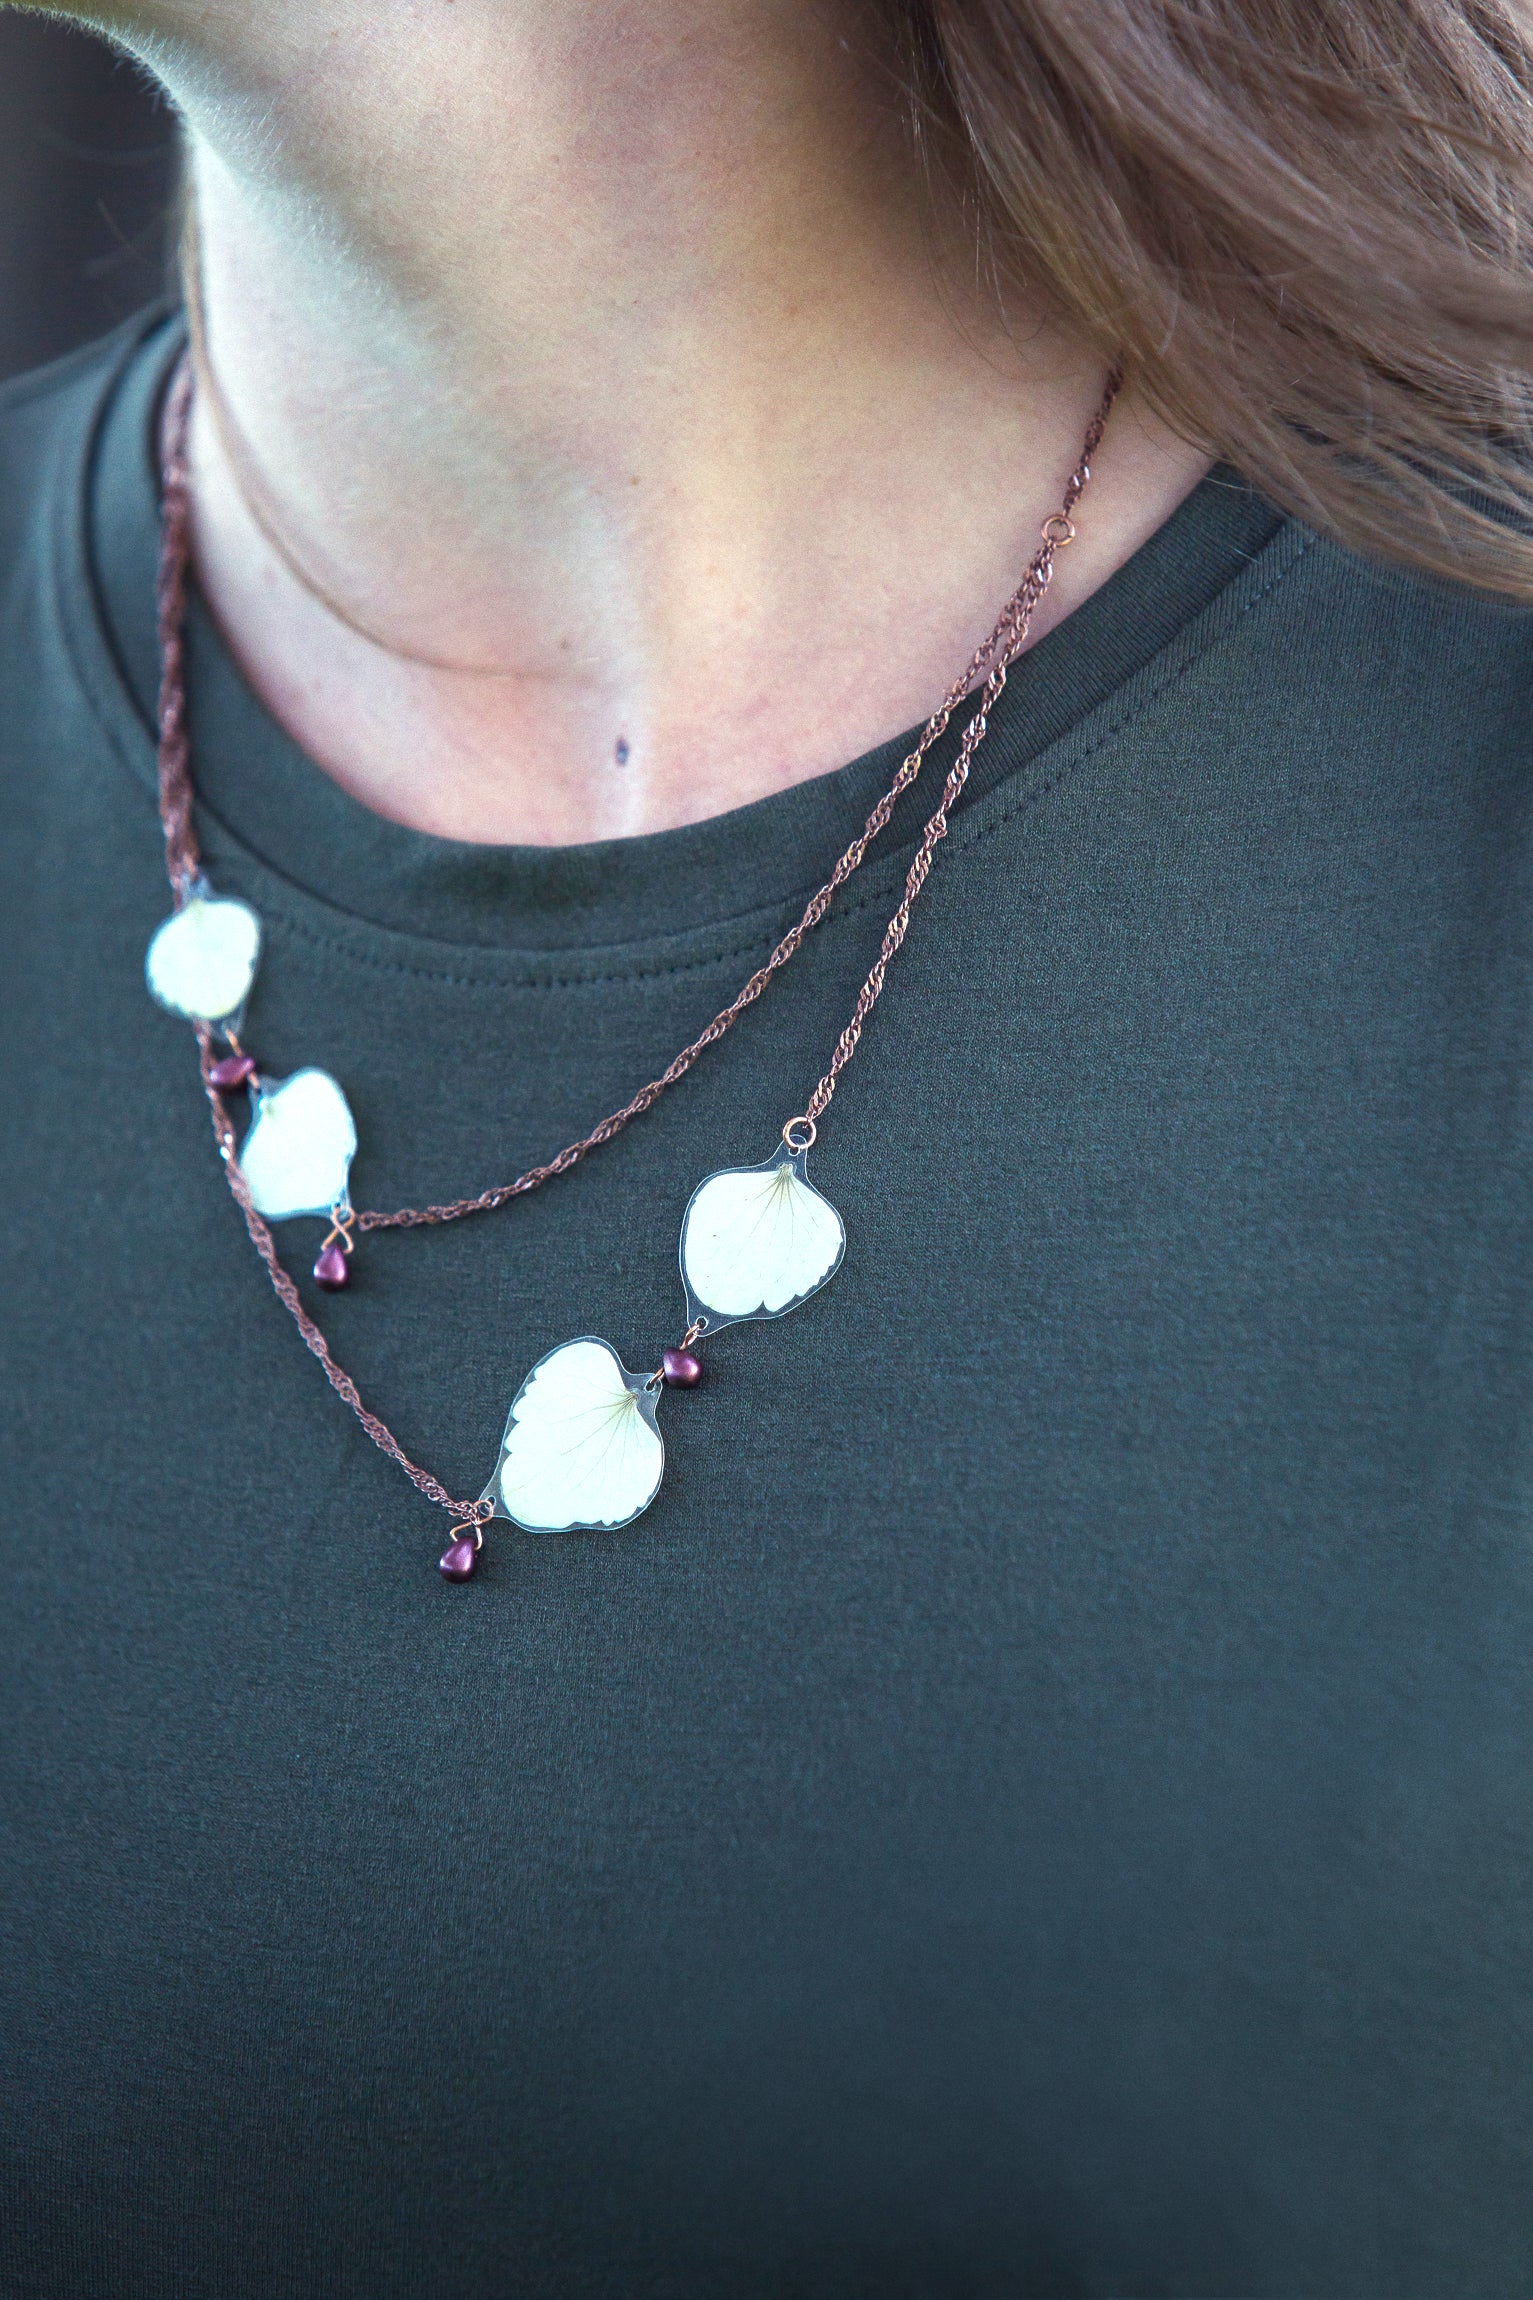 White Hydrangea Pressed Petal Necklace with Cranberry Teardrop Glass Beads